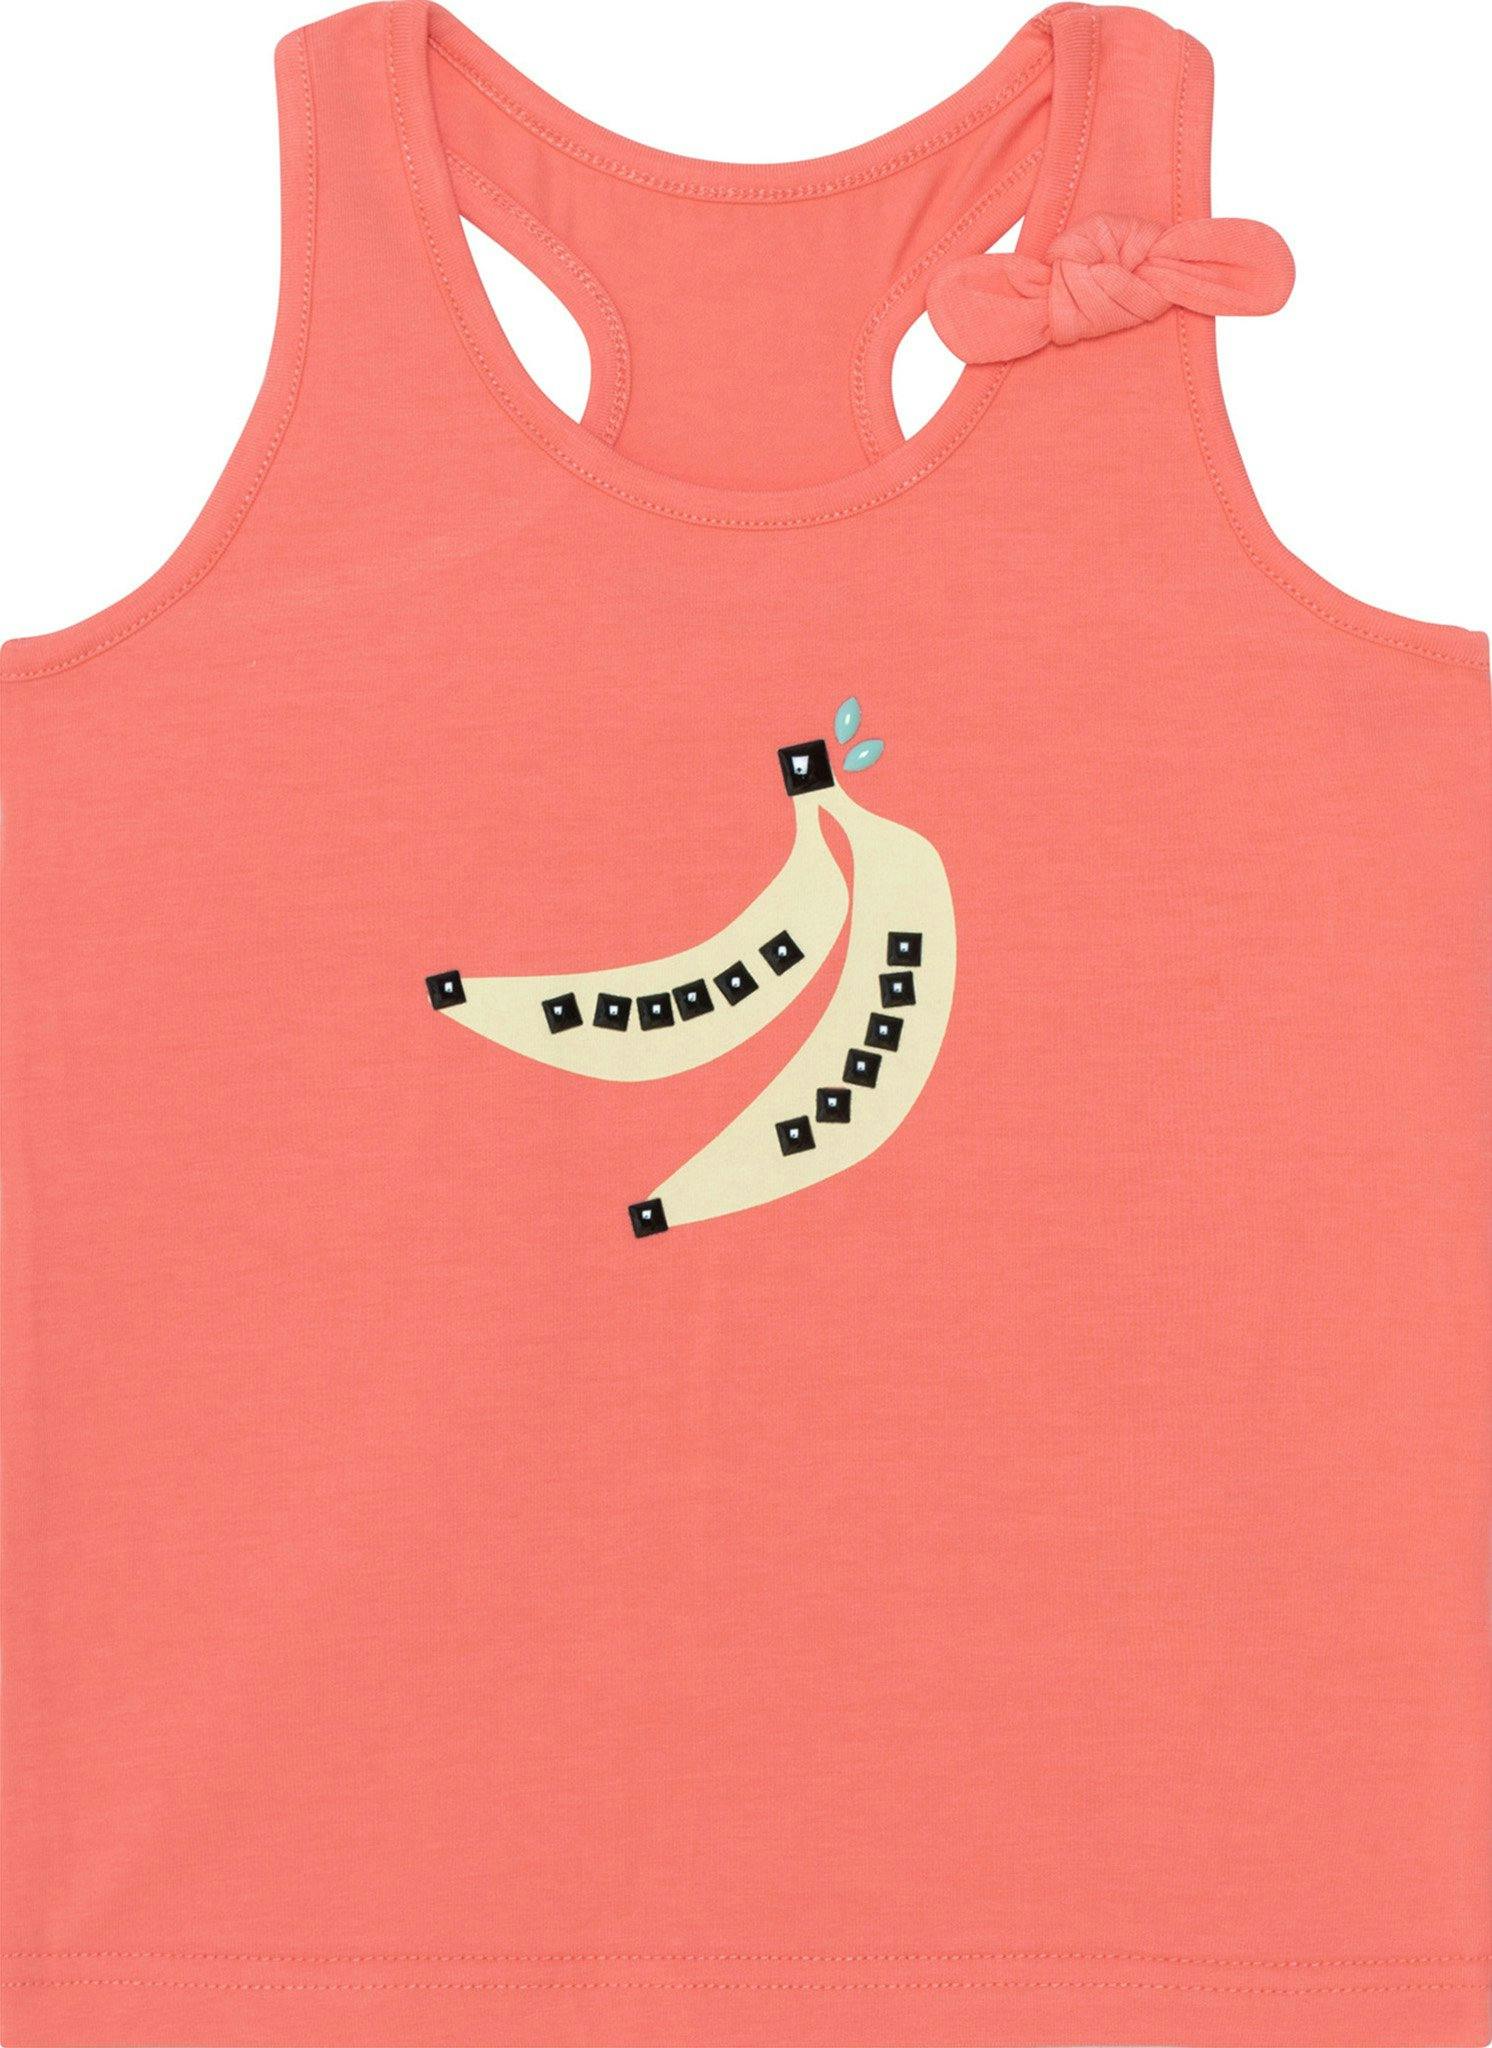 Product image for Organic Cotton Graphic Knot Tank Top - Little Girls